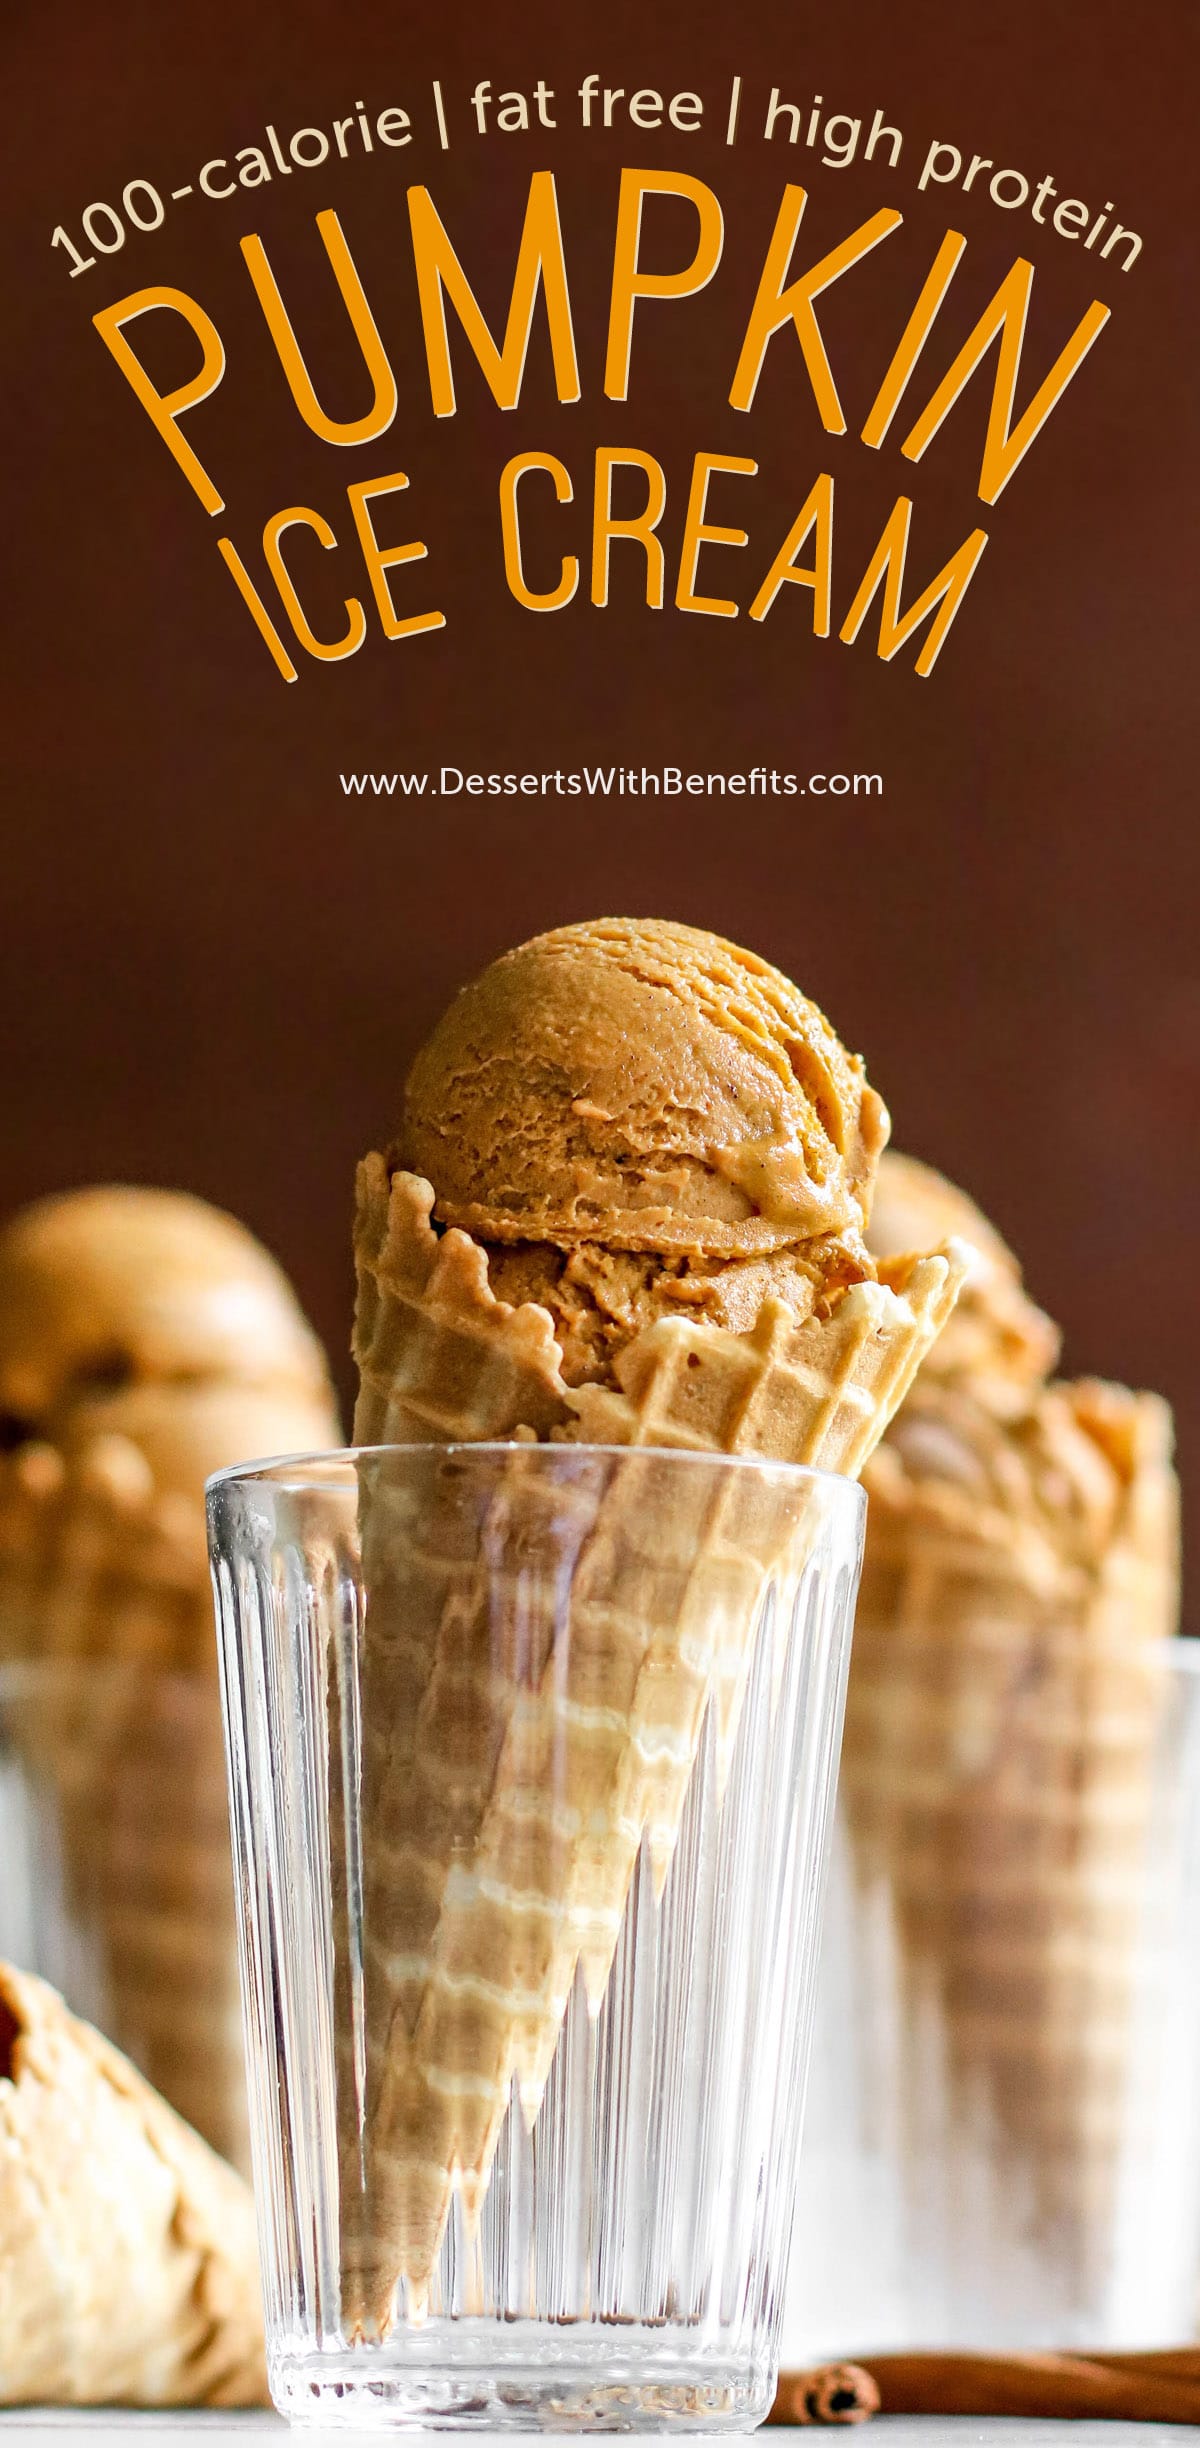 This 100-calorie Pumpkin Ice Cream is ULTRA creamy, perfectly spiced, and perfectly sweet. Made with 100% good-for-you ingredients (NO heavy cream, no eggs, and no refined sugar)! This version is fat free, refined sugar free, high protein, and gluten free too! #pumpkin #pumpkinpiespice #allnatural #refinedsugarfree #healthyicecream #highprotein #fatfree #easy #homemadeicecream